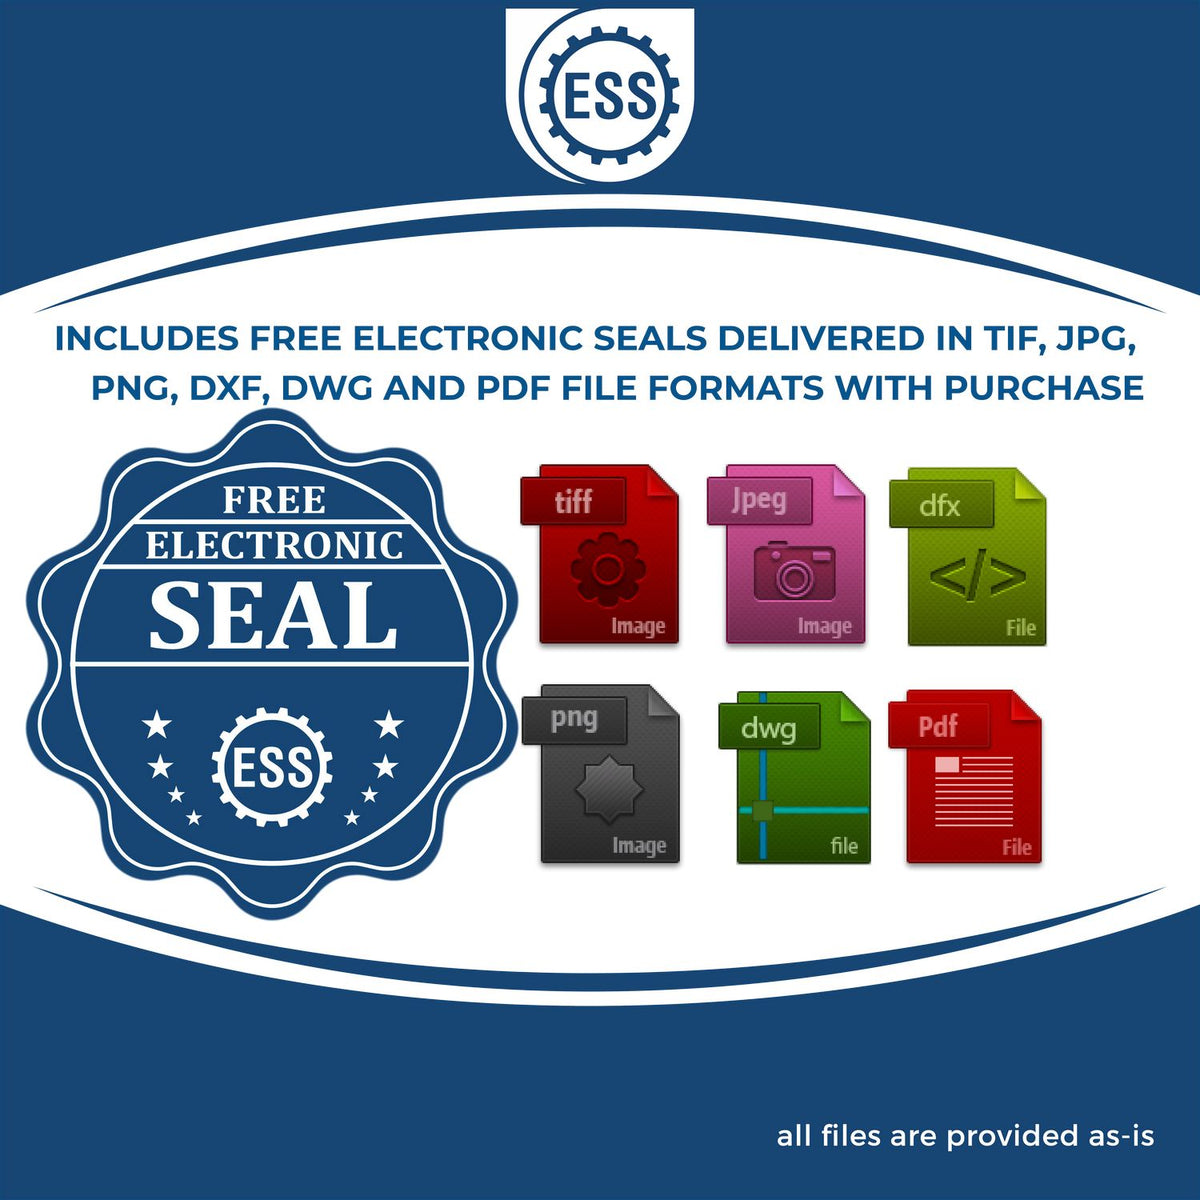 An infographic for the free electronic seal for the Utah Geologist Desk Seal illustrating the different file type icons such as DXF, DWG, TIF, JPG and PNG.